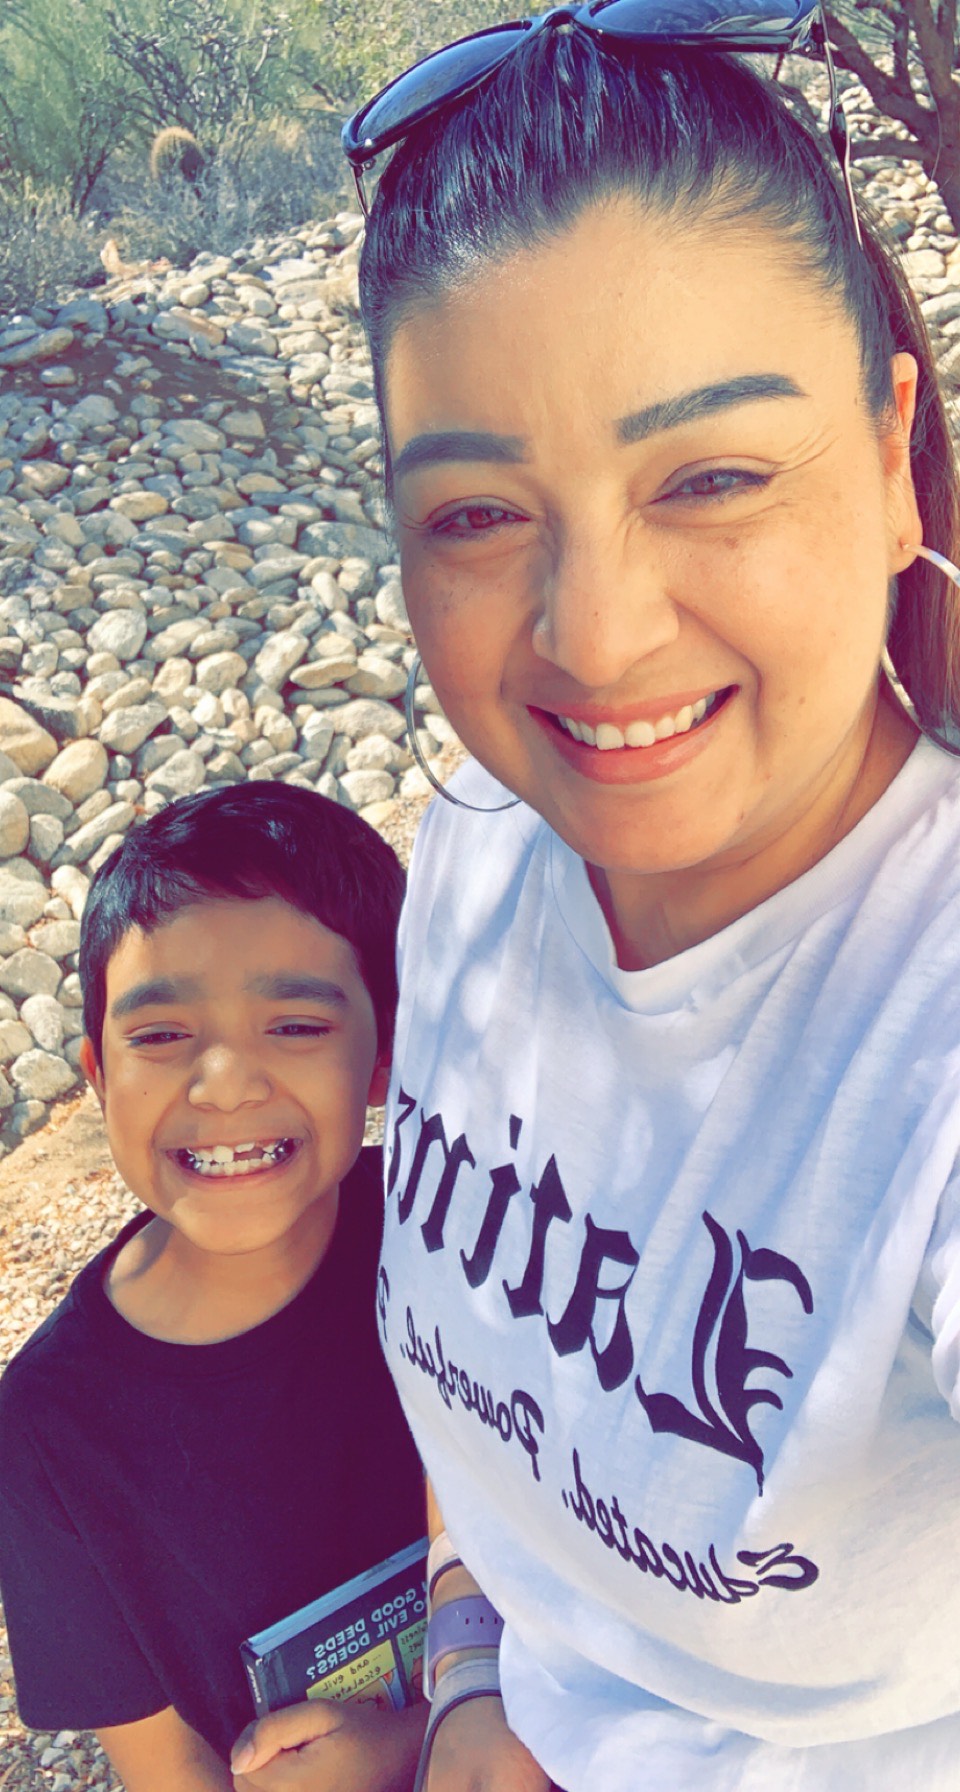 Vanessa shares her story about making hard decisions as her son's advocate.